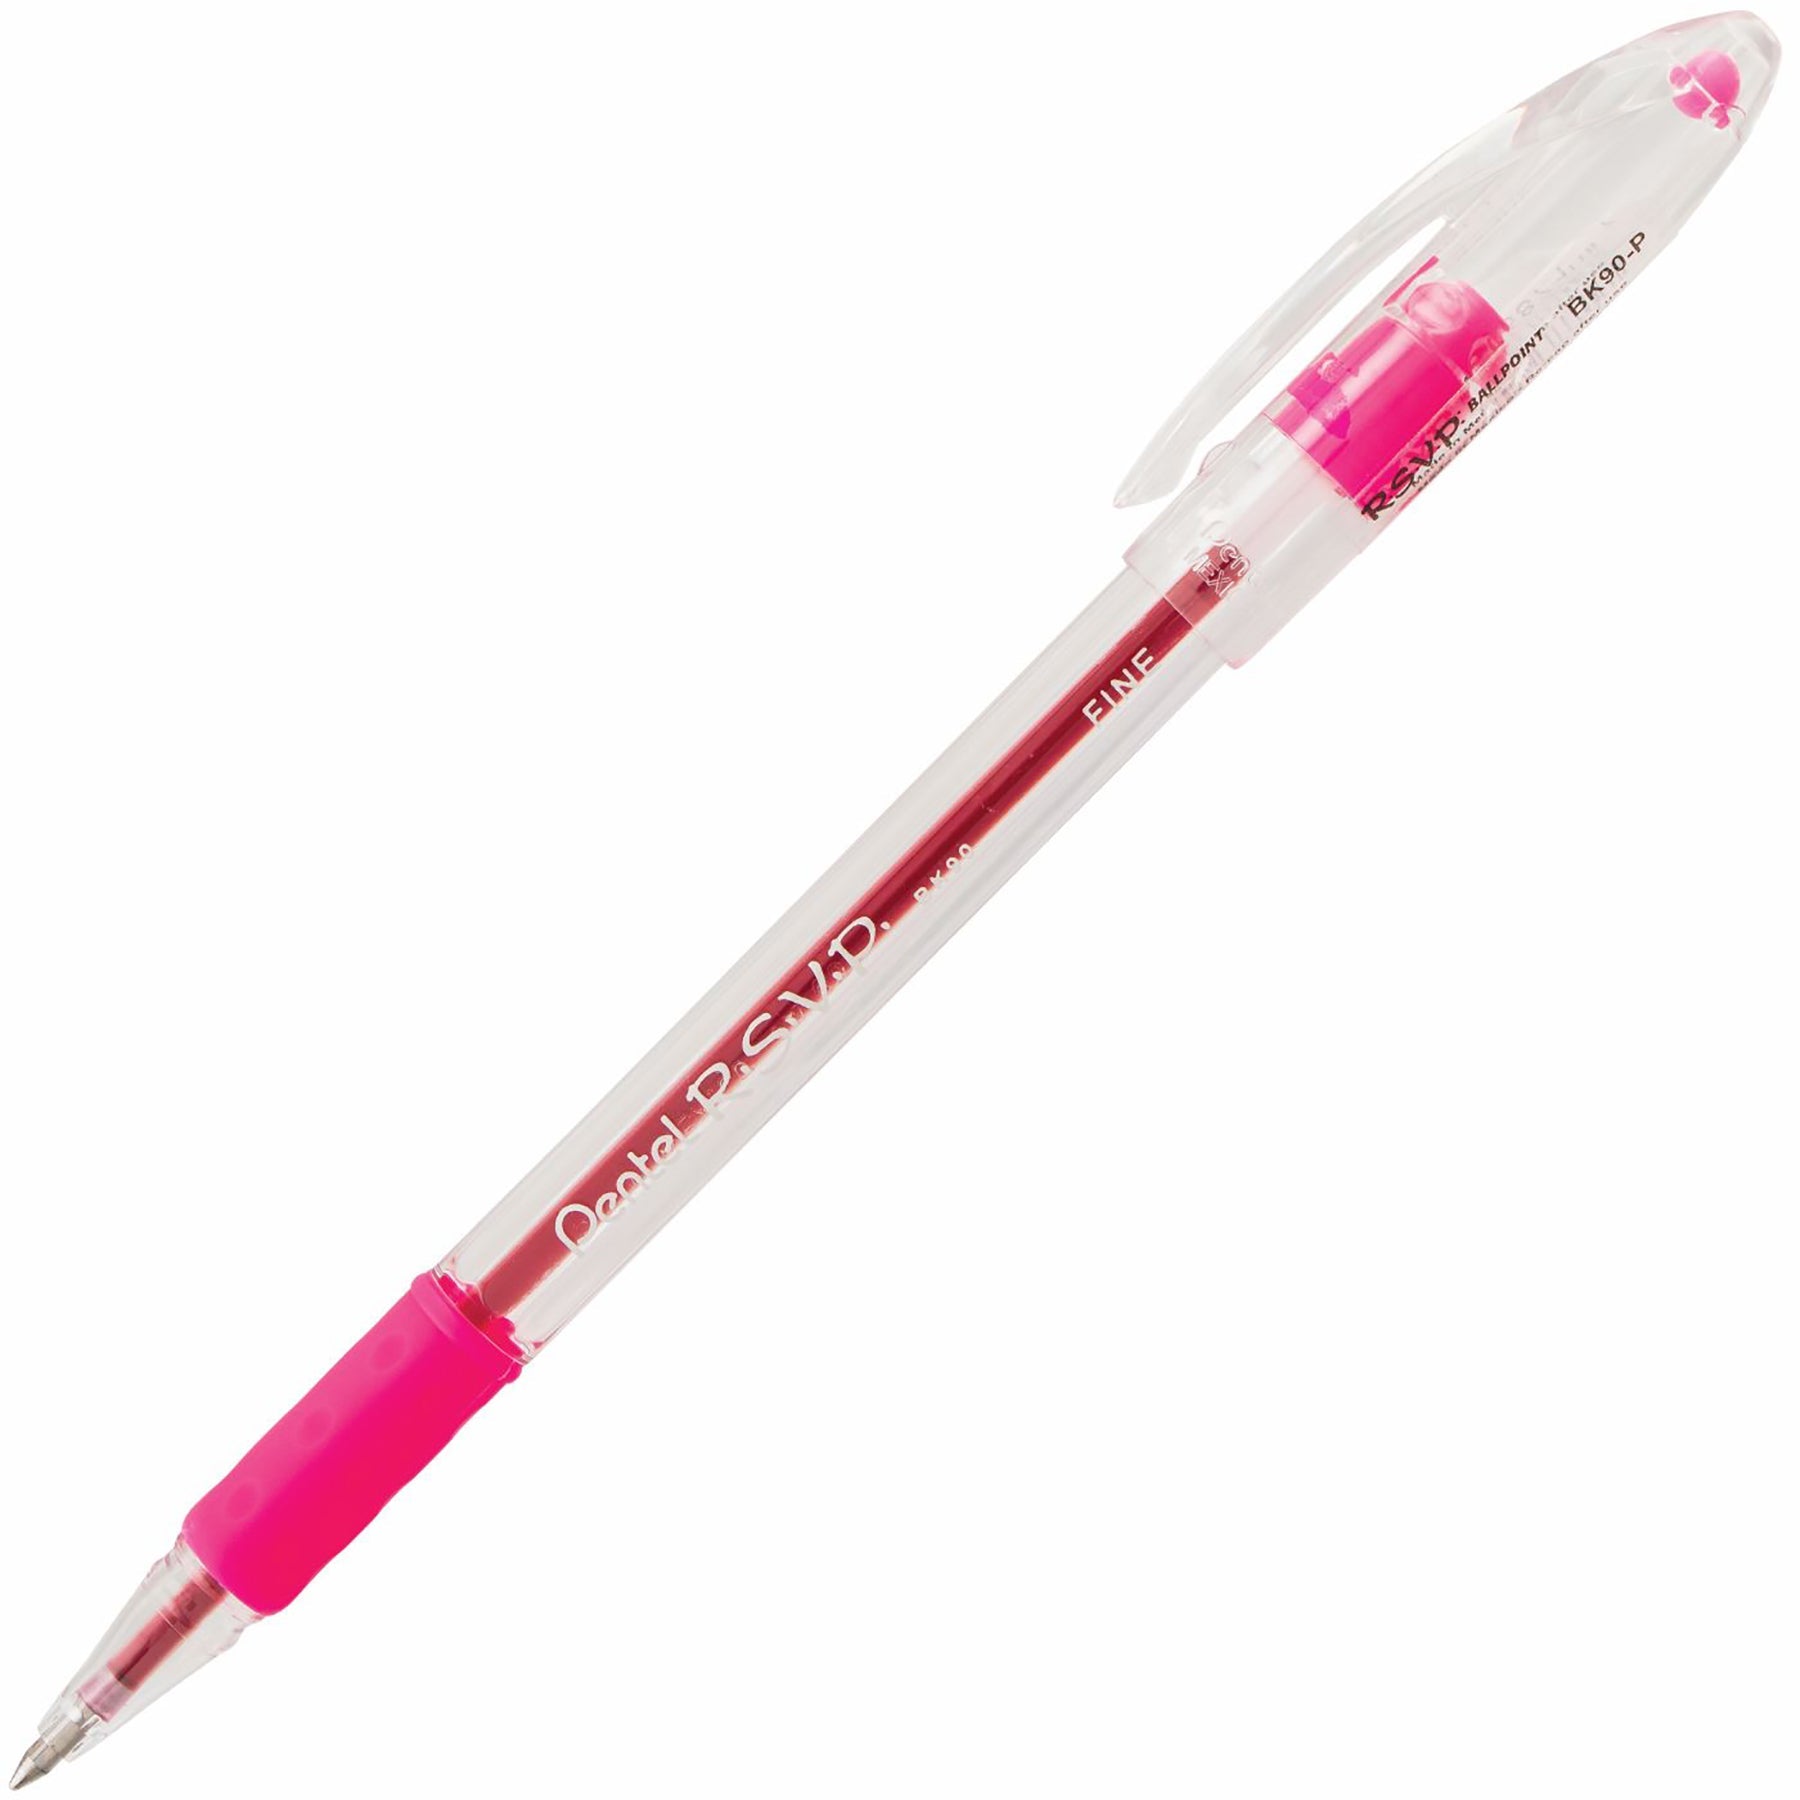 Pentel R.S.V.P. Ballpoint Pen with Cap Pink Ink 0.7mm